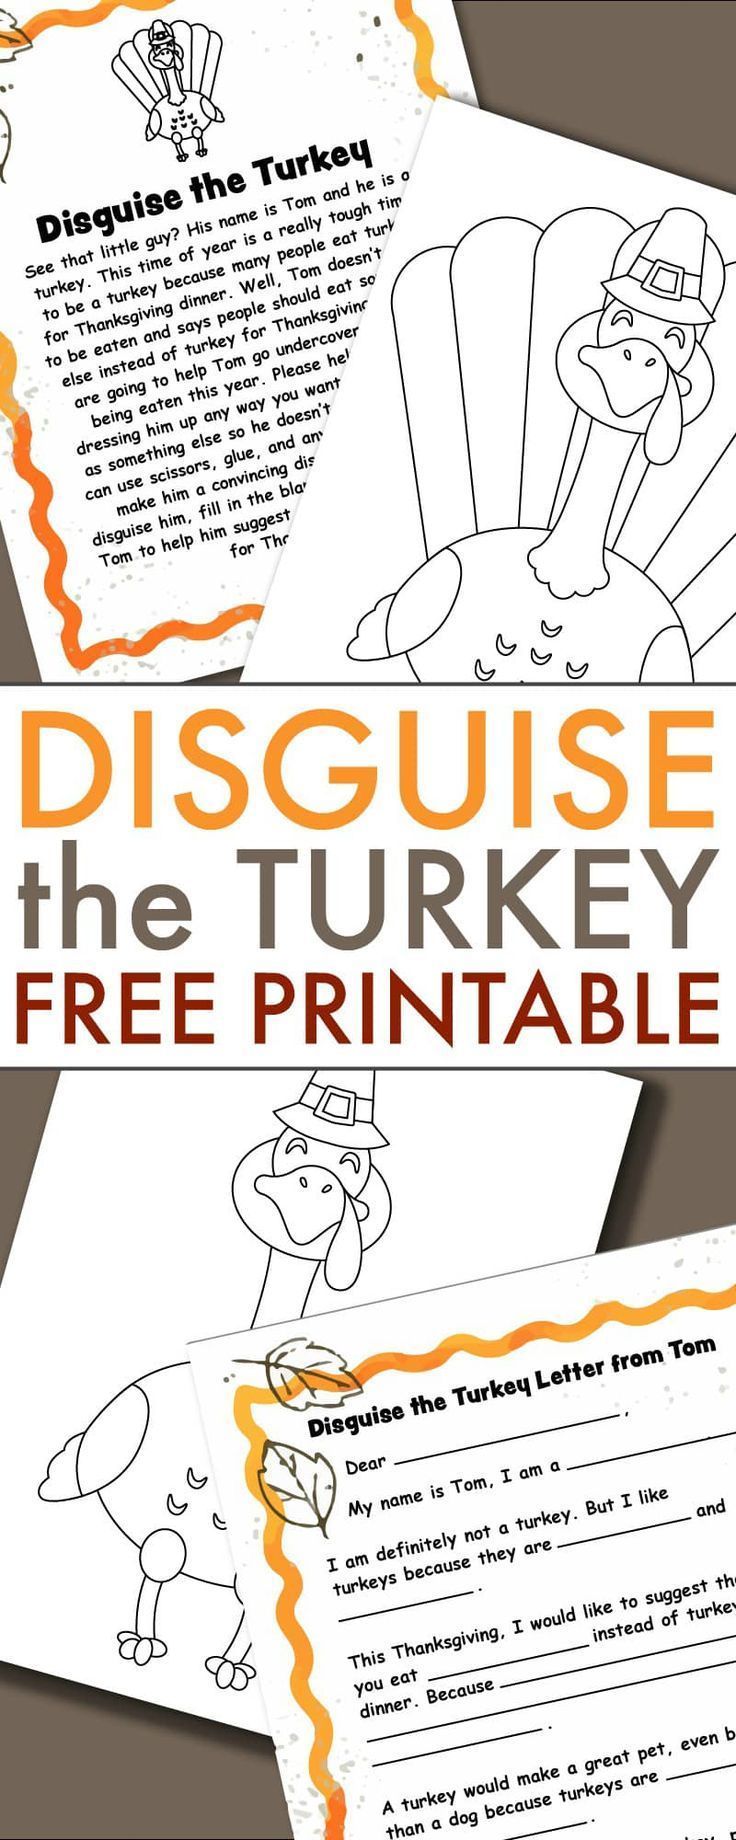 A Turkey in Disguise Project Free Printable Template - A Turkey in Disguise Project Free Printable Template -   disguise a turkey project printable template